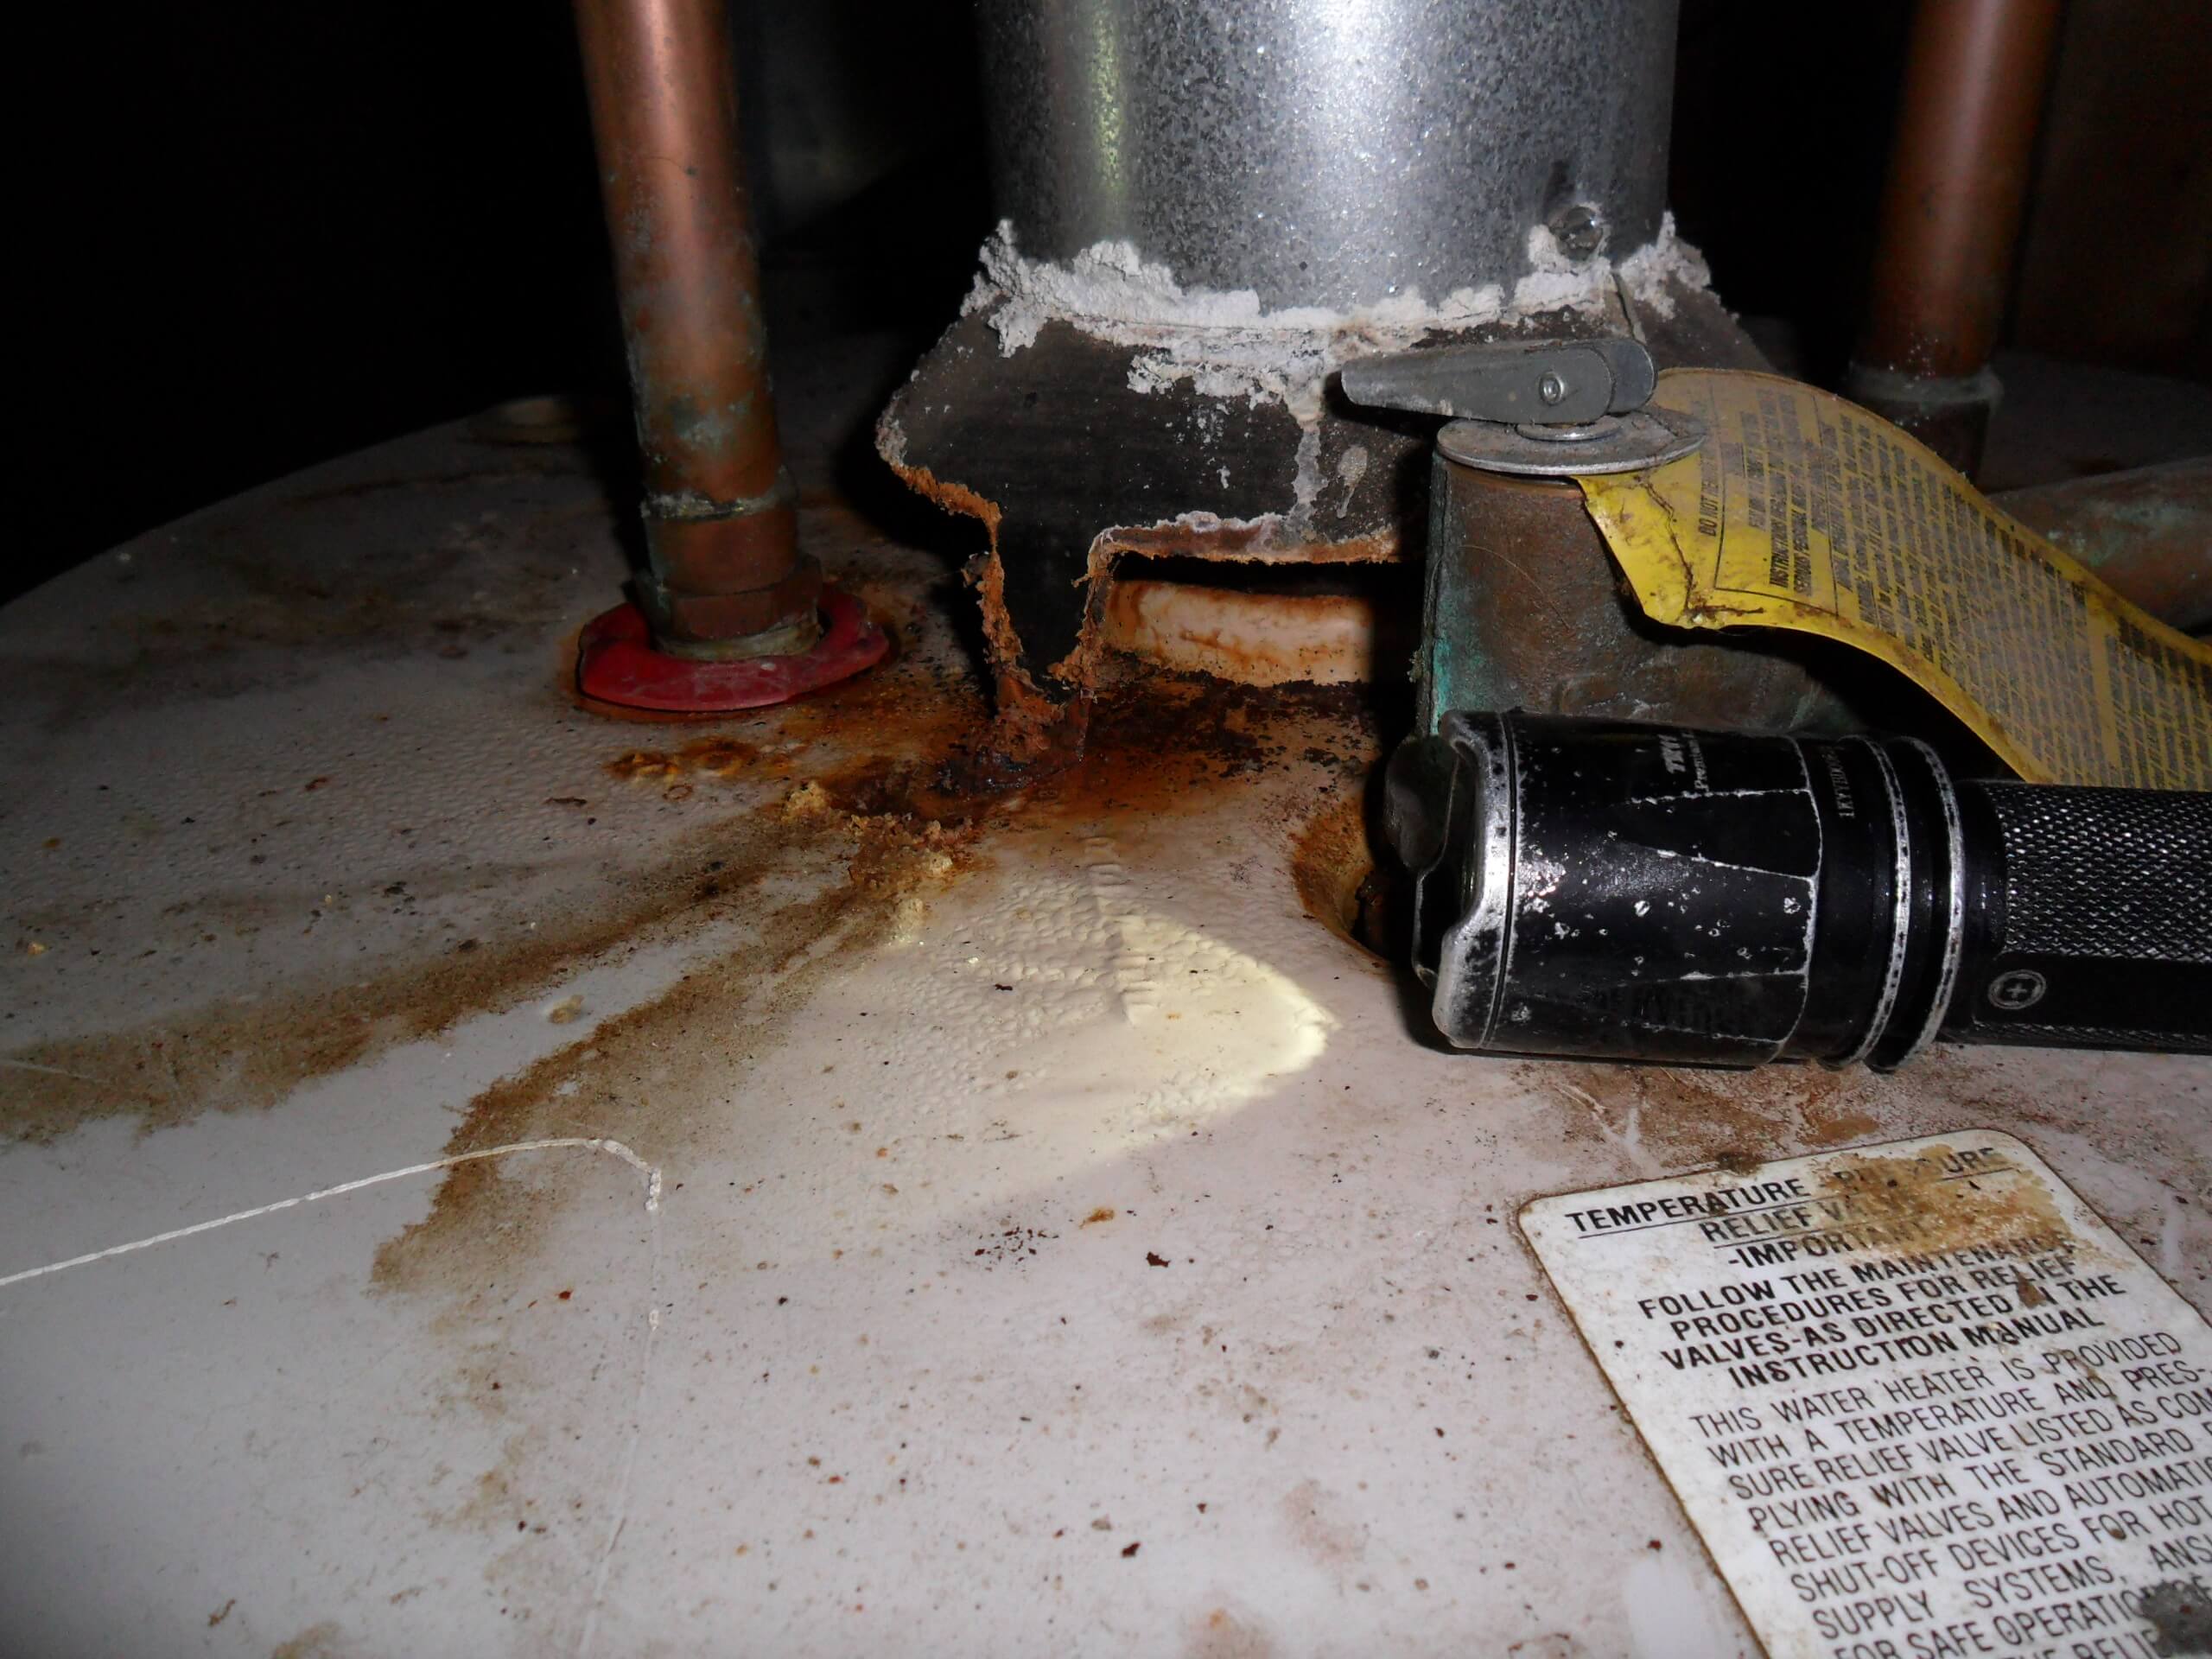 Water Heater Backdrafting, Part 1 of 2: Why it Matters and What to